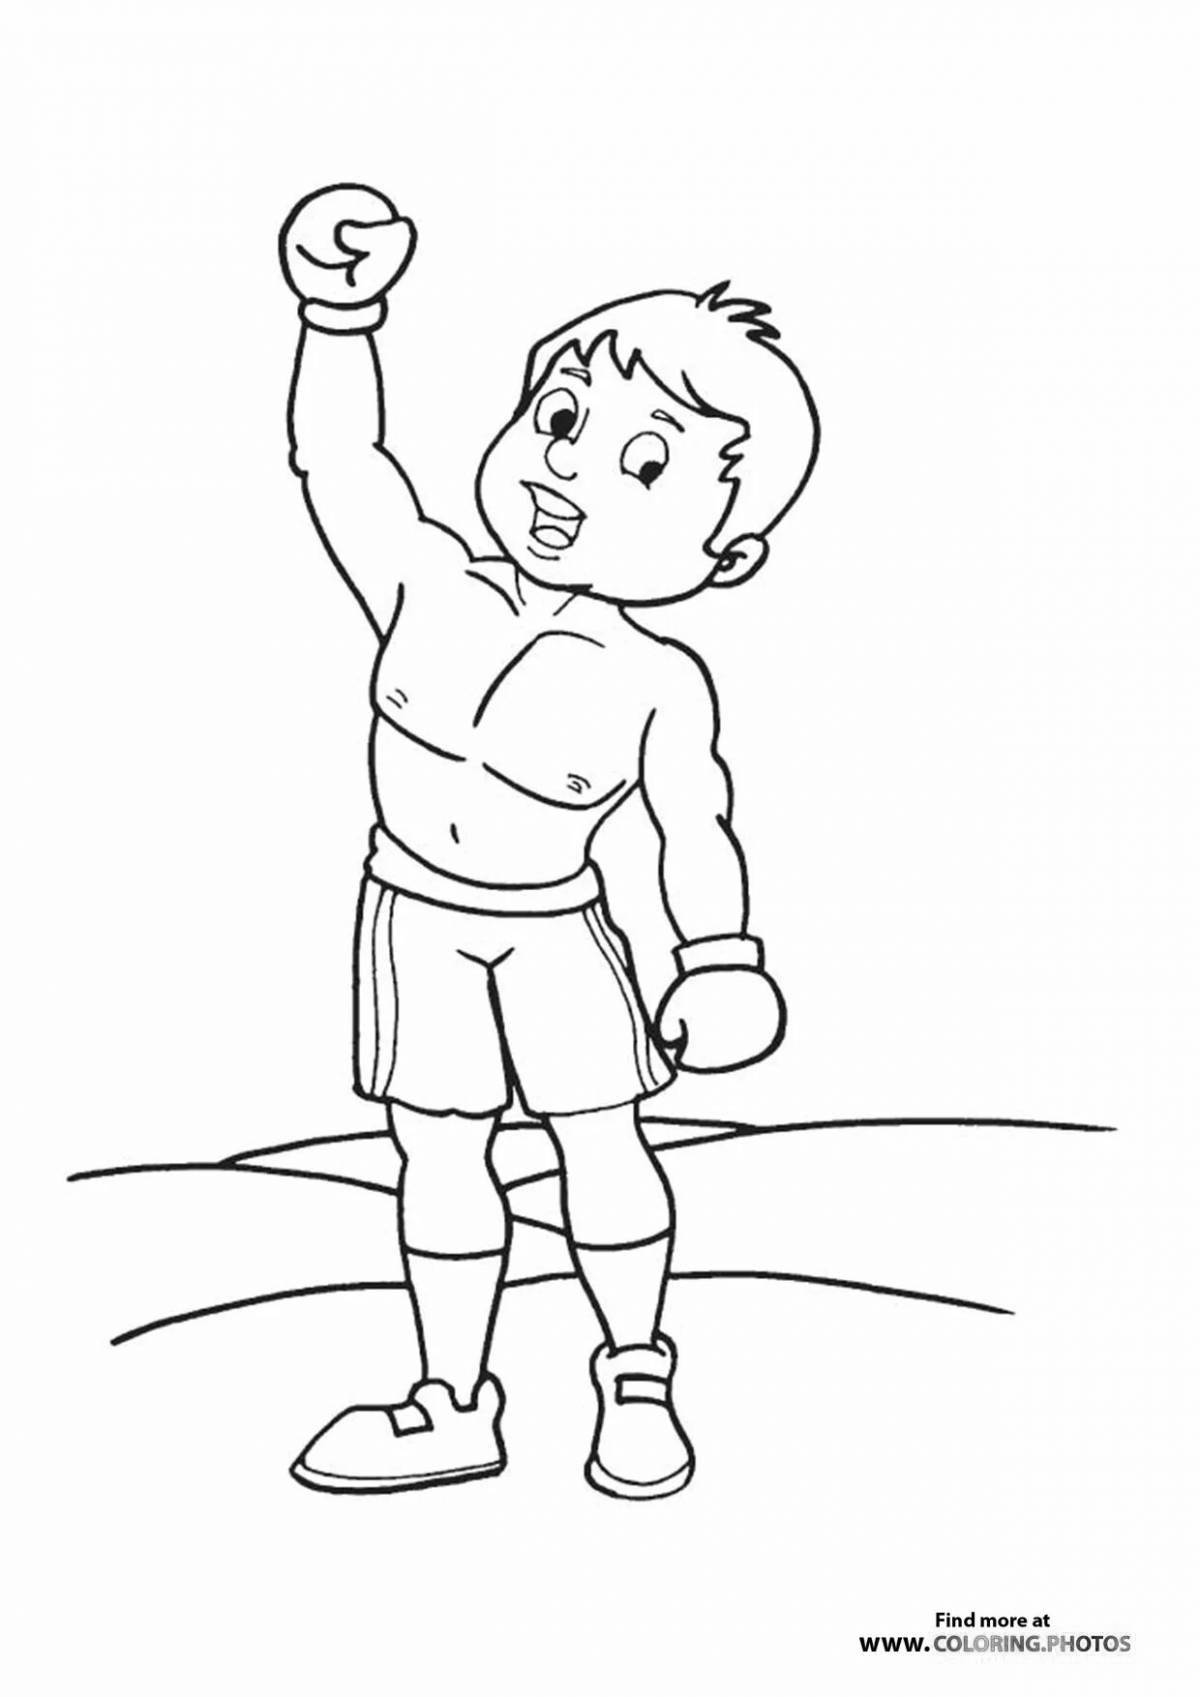 Sweet boxing coloring book for kids